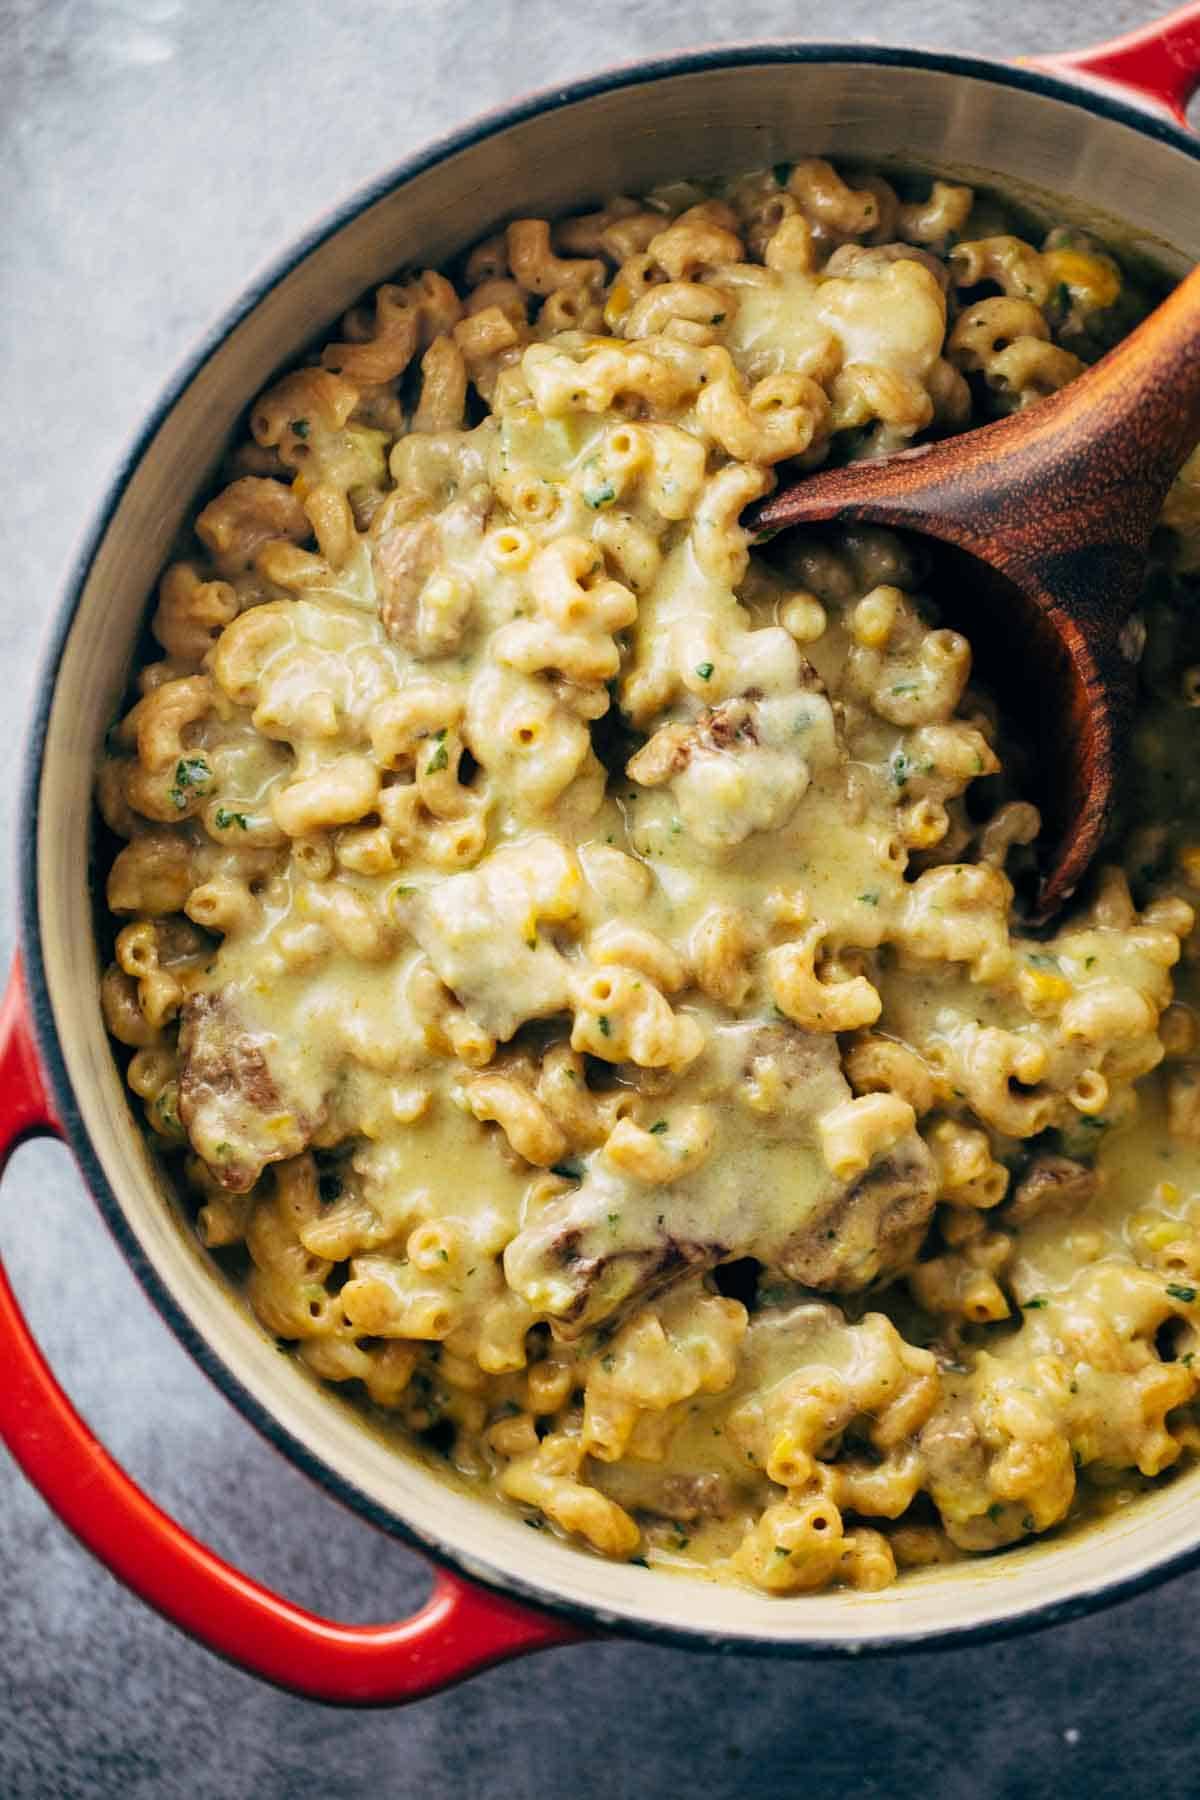 Steak and Cheddar Mac and Cheese via Pinch of Yum